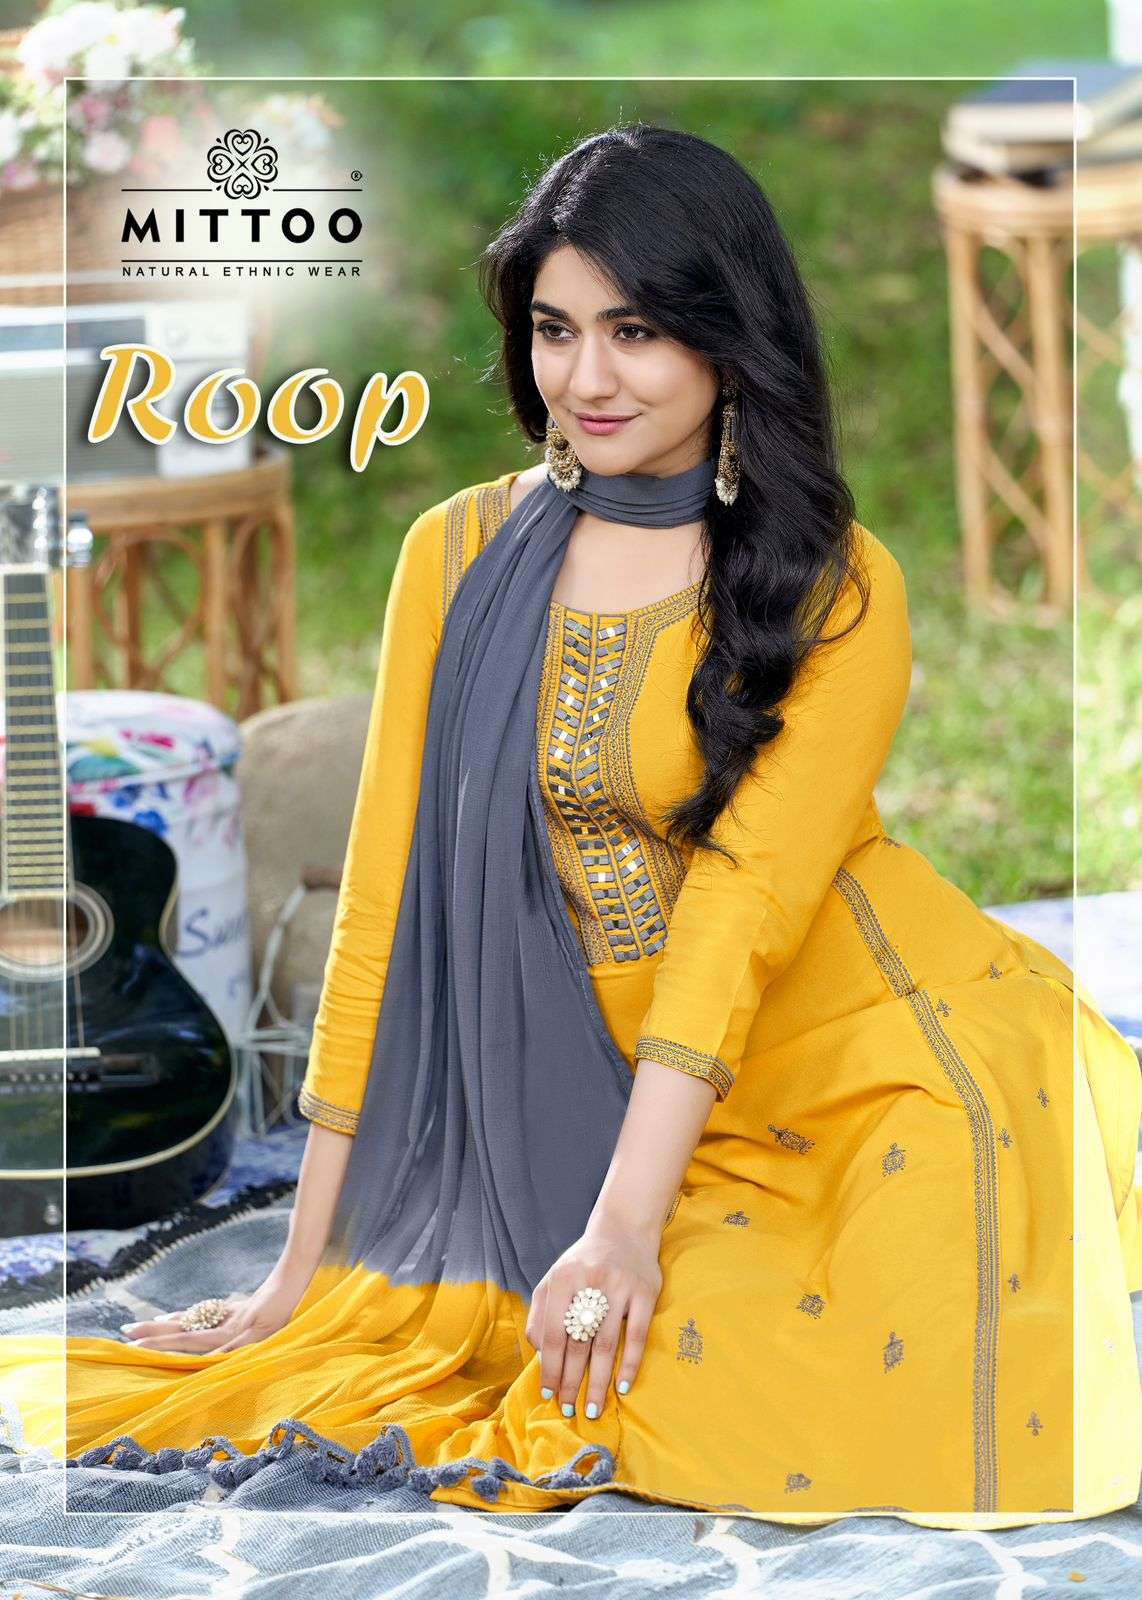 Mittoo Roop Festive Collection Readymade Straight Suit New Designs